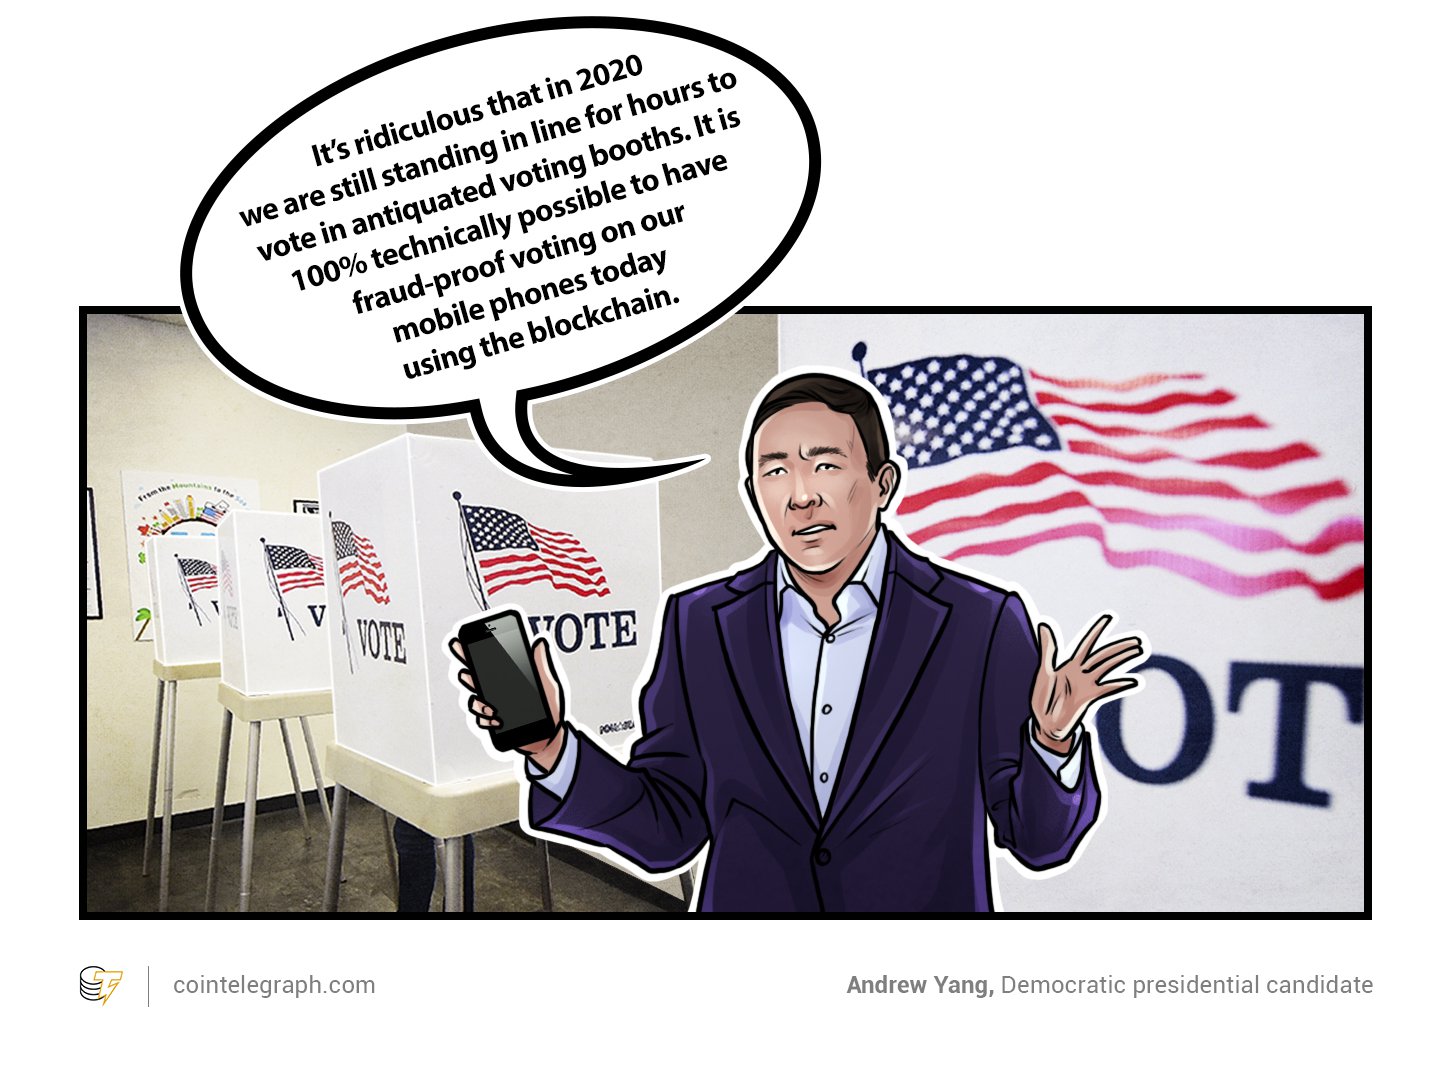 Andrew Yang, Democratic presidential candidate